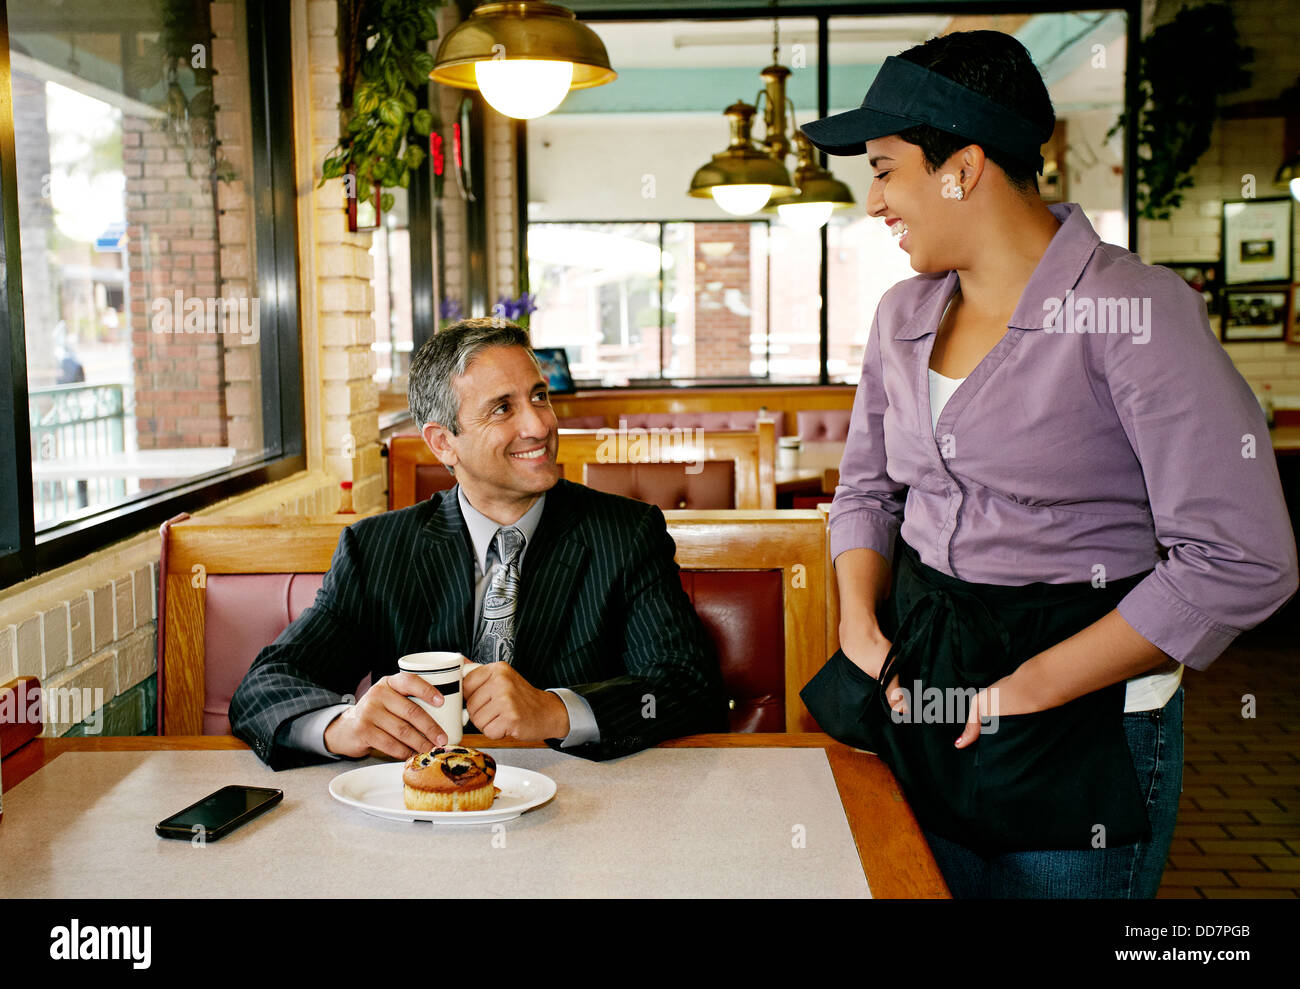 Hispanic waitress talking to businessman in restaurant Banque D'Images